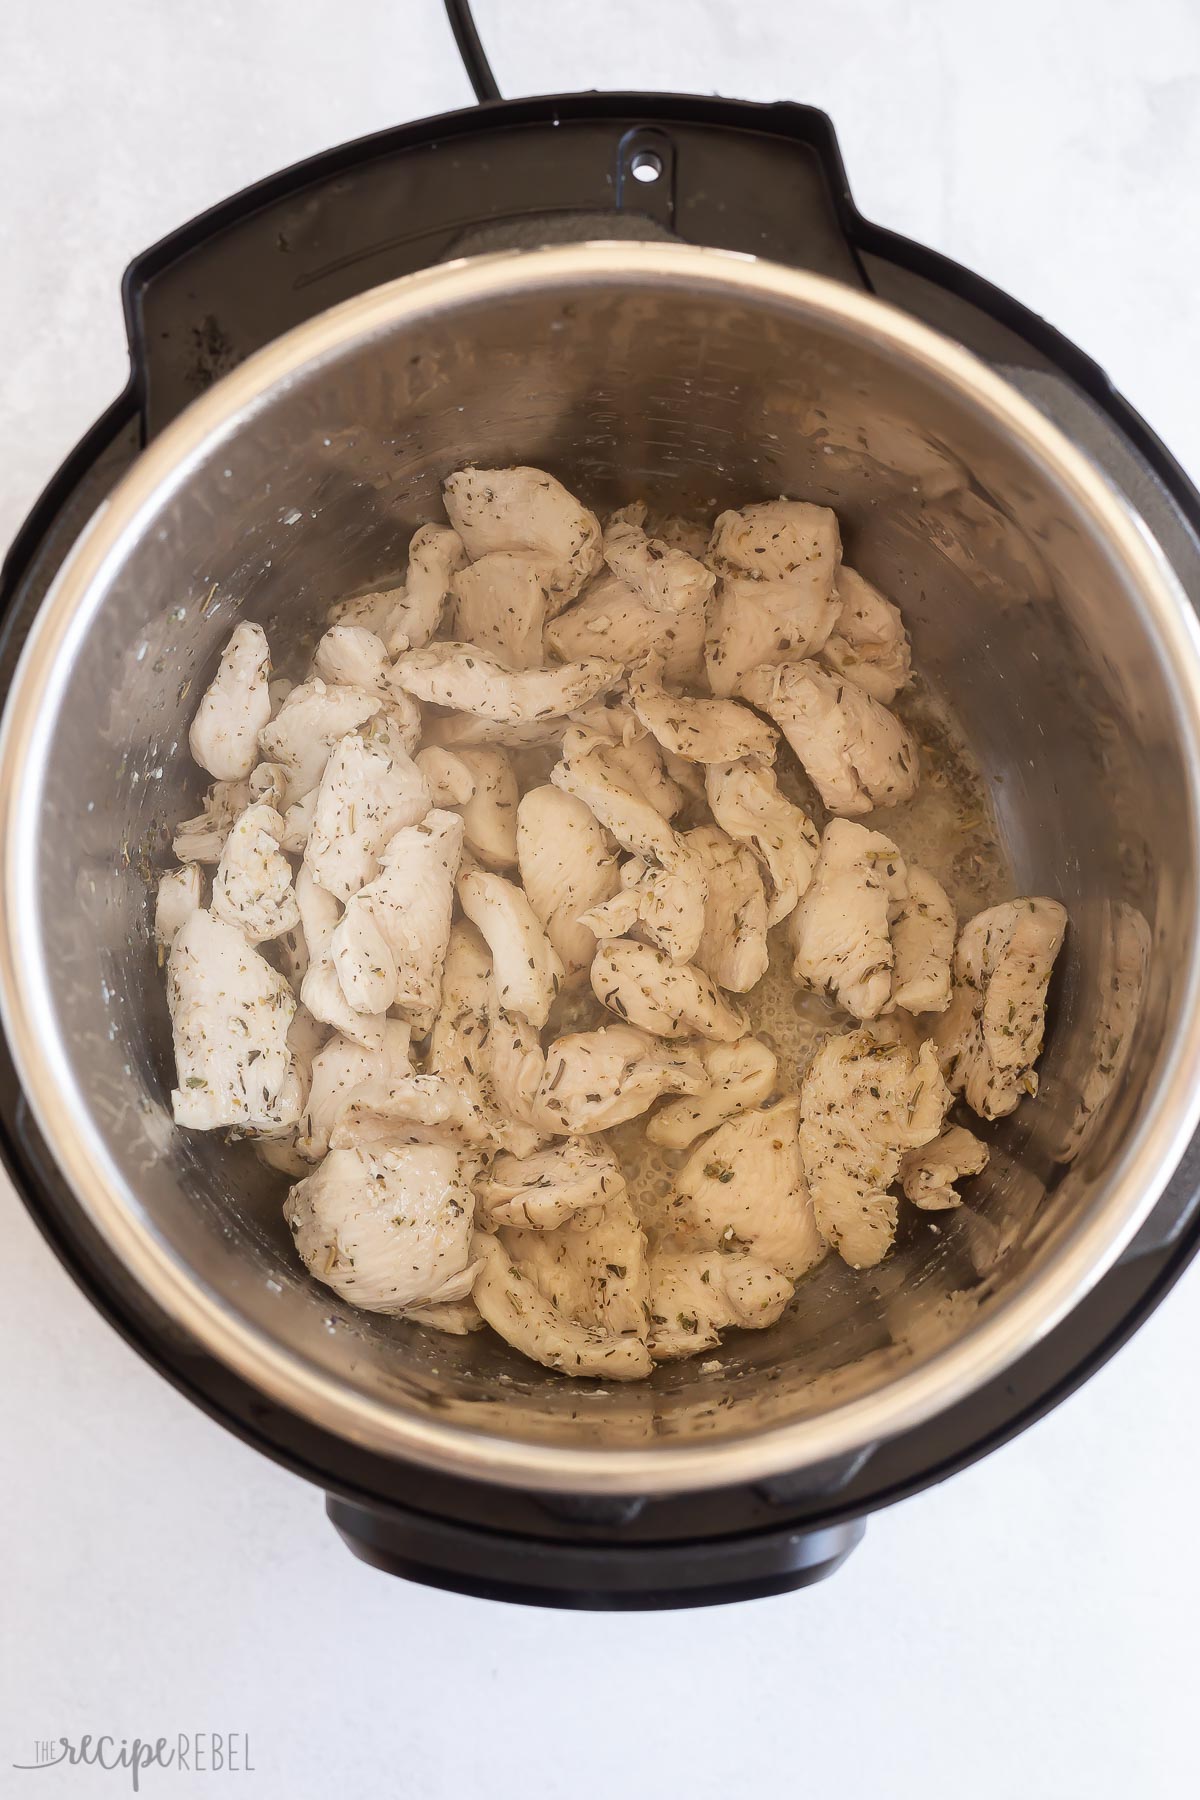 chicken breast pieces cooking in instant pot.